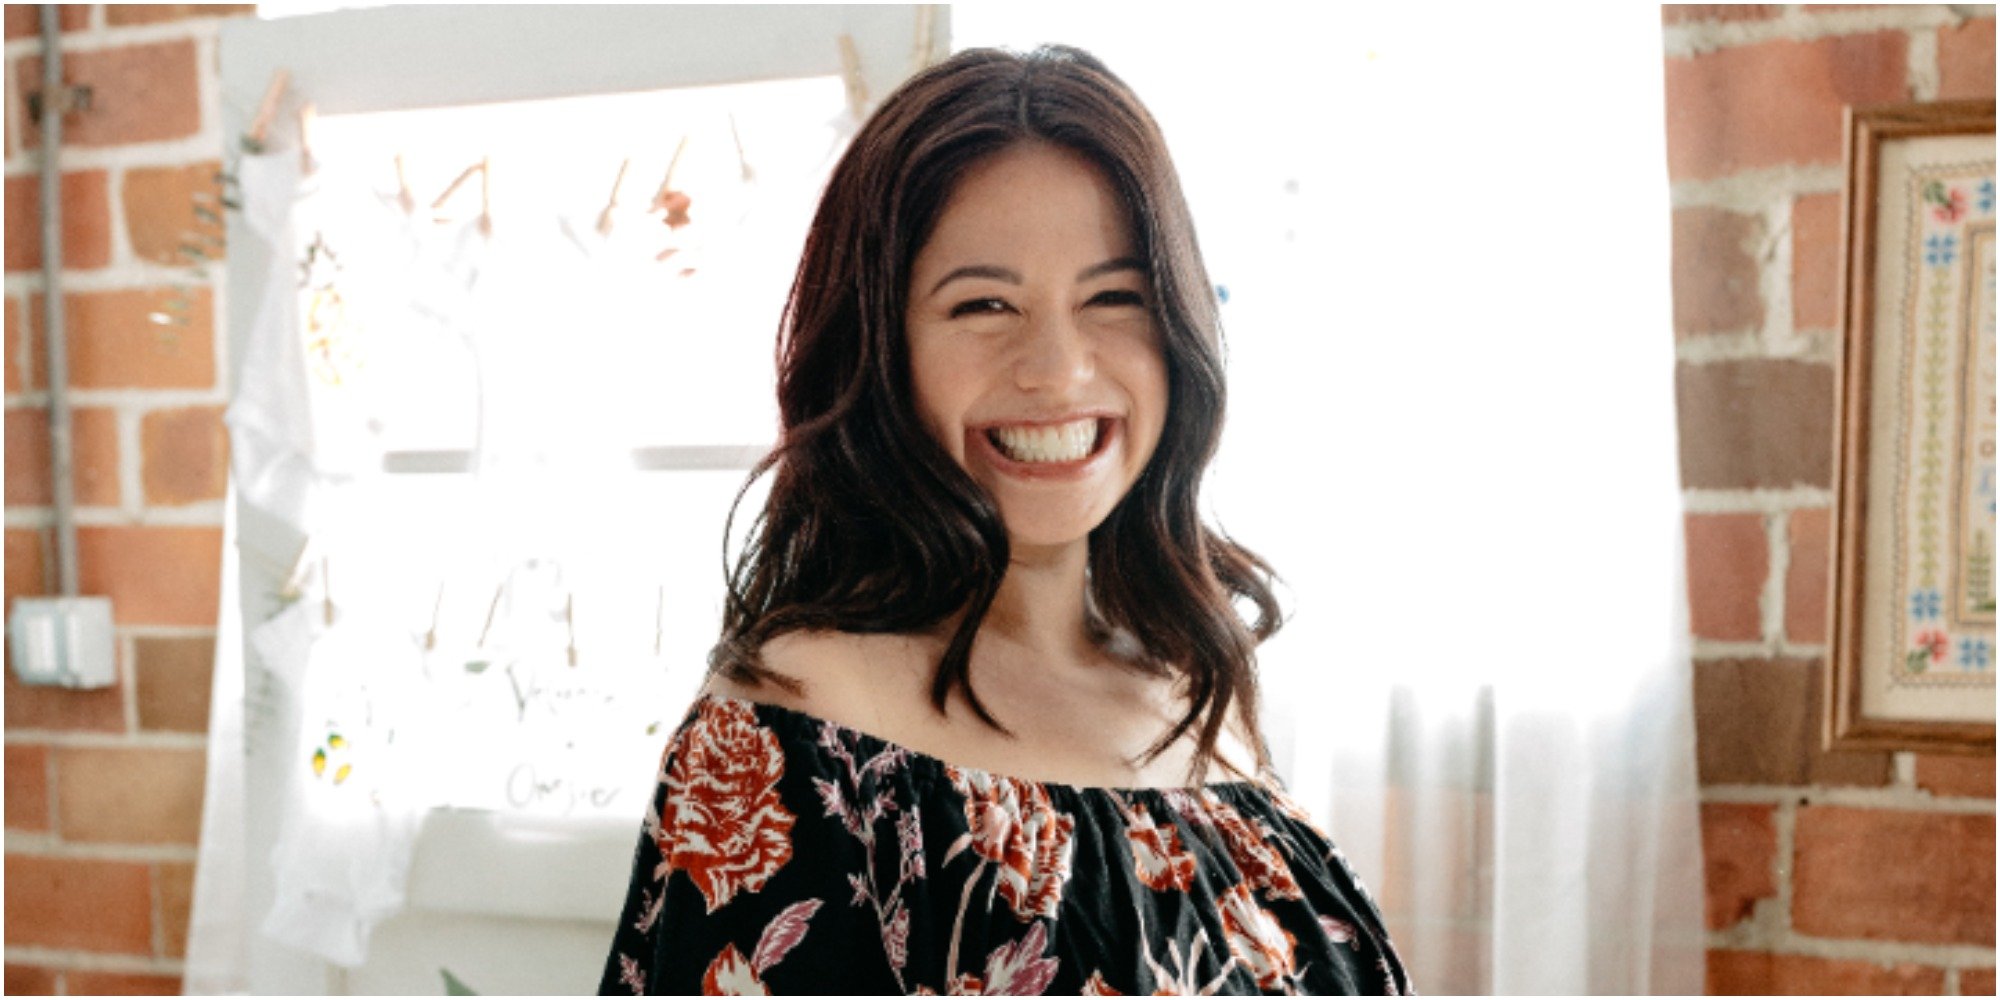 Molly Yeh poses in a floral dress for a publicity photograph.